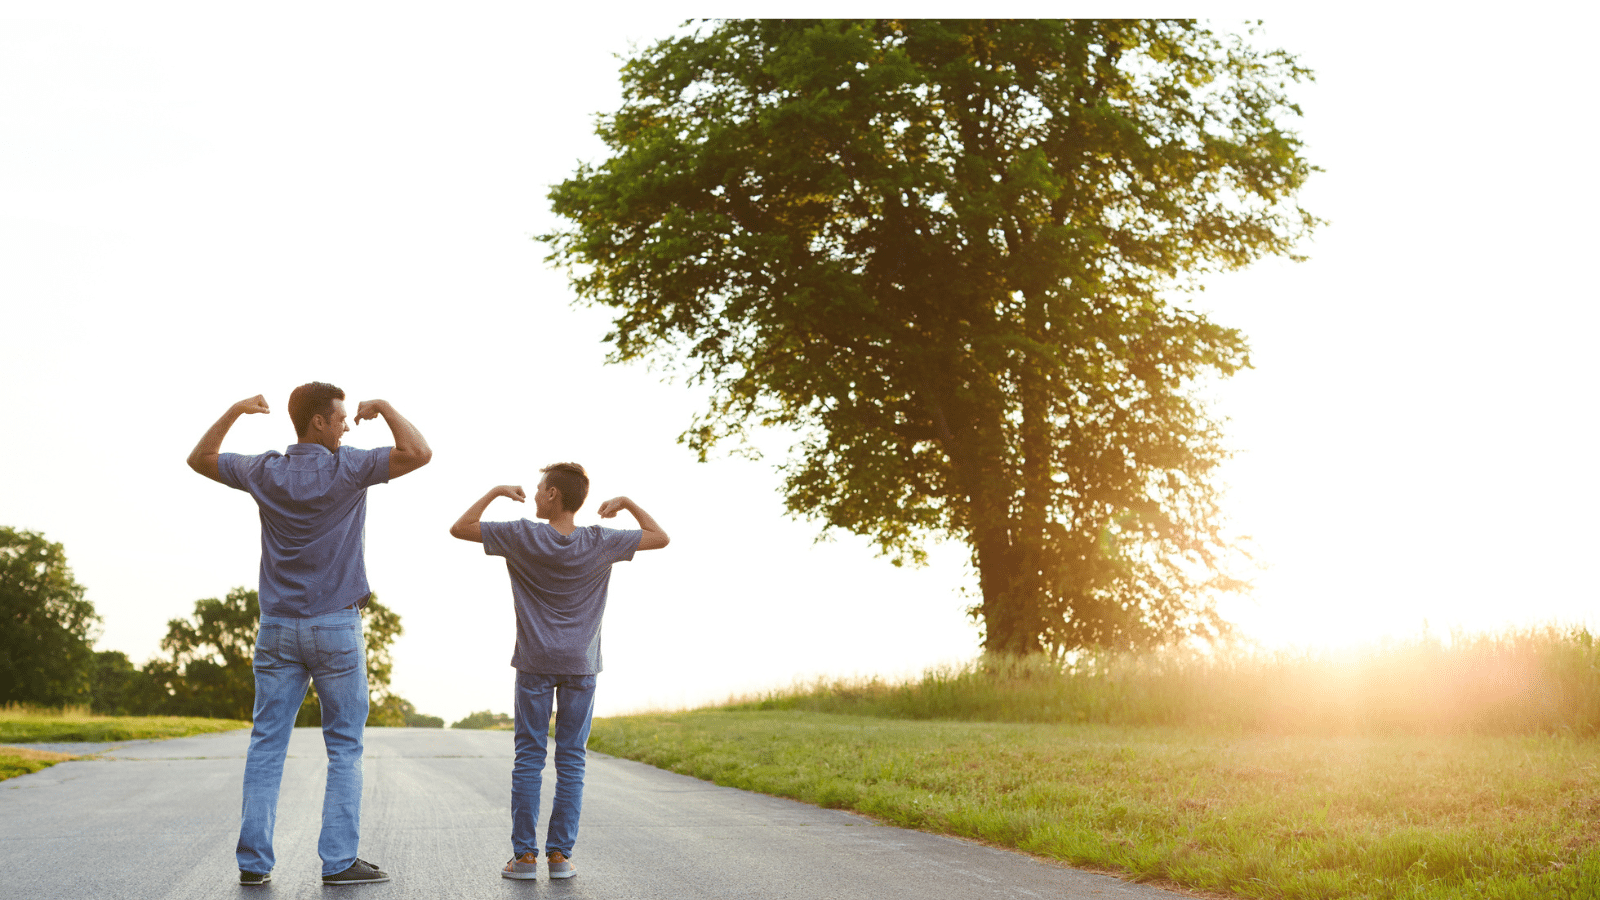 Father and Son walking down a paved road next to a tree, with arms up both showing their muscles (strength).